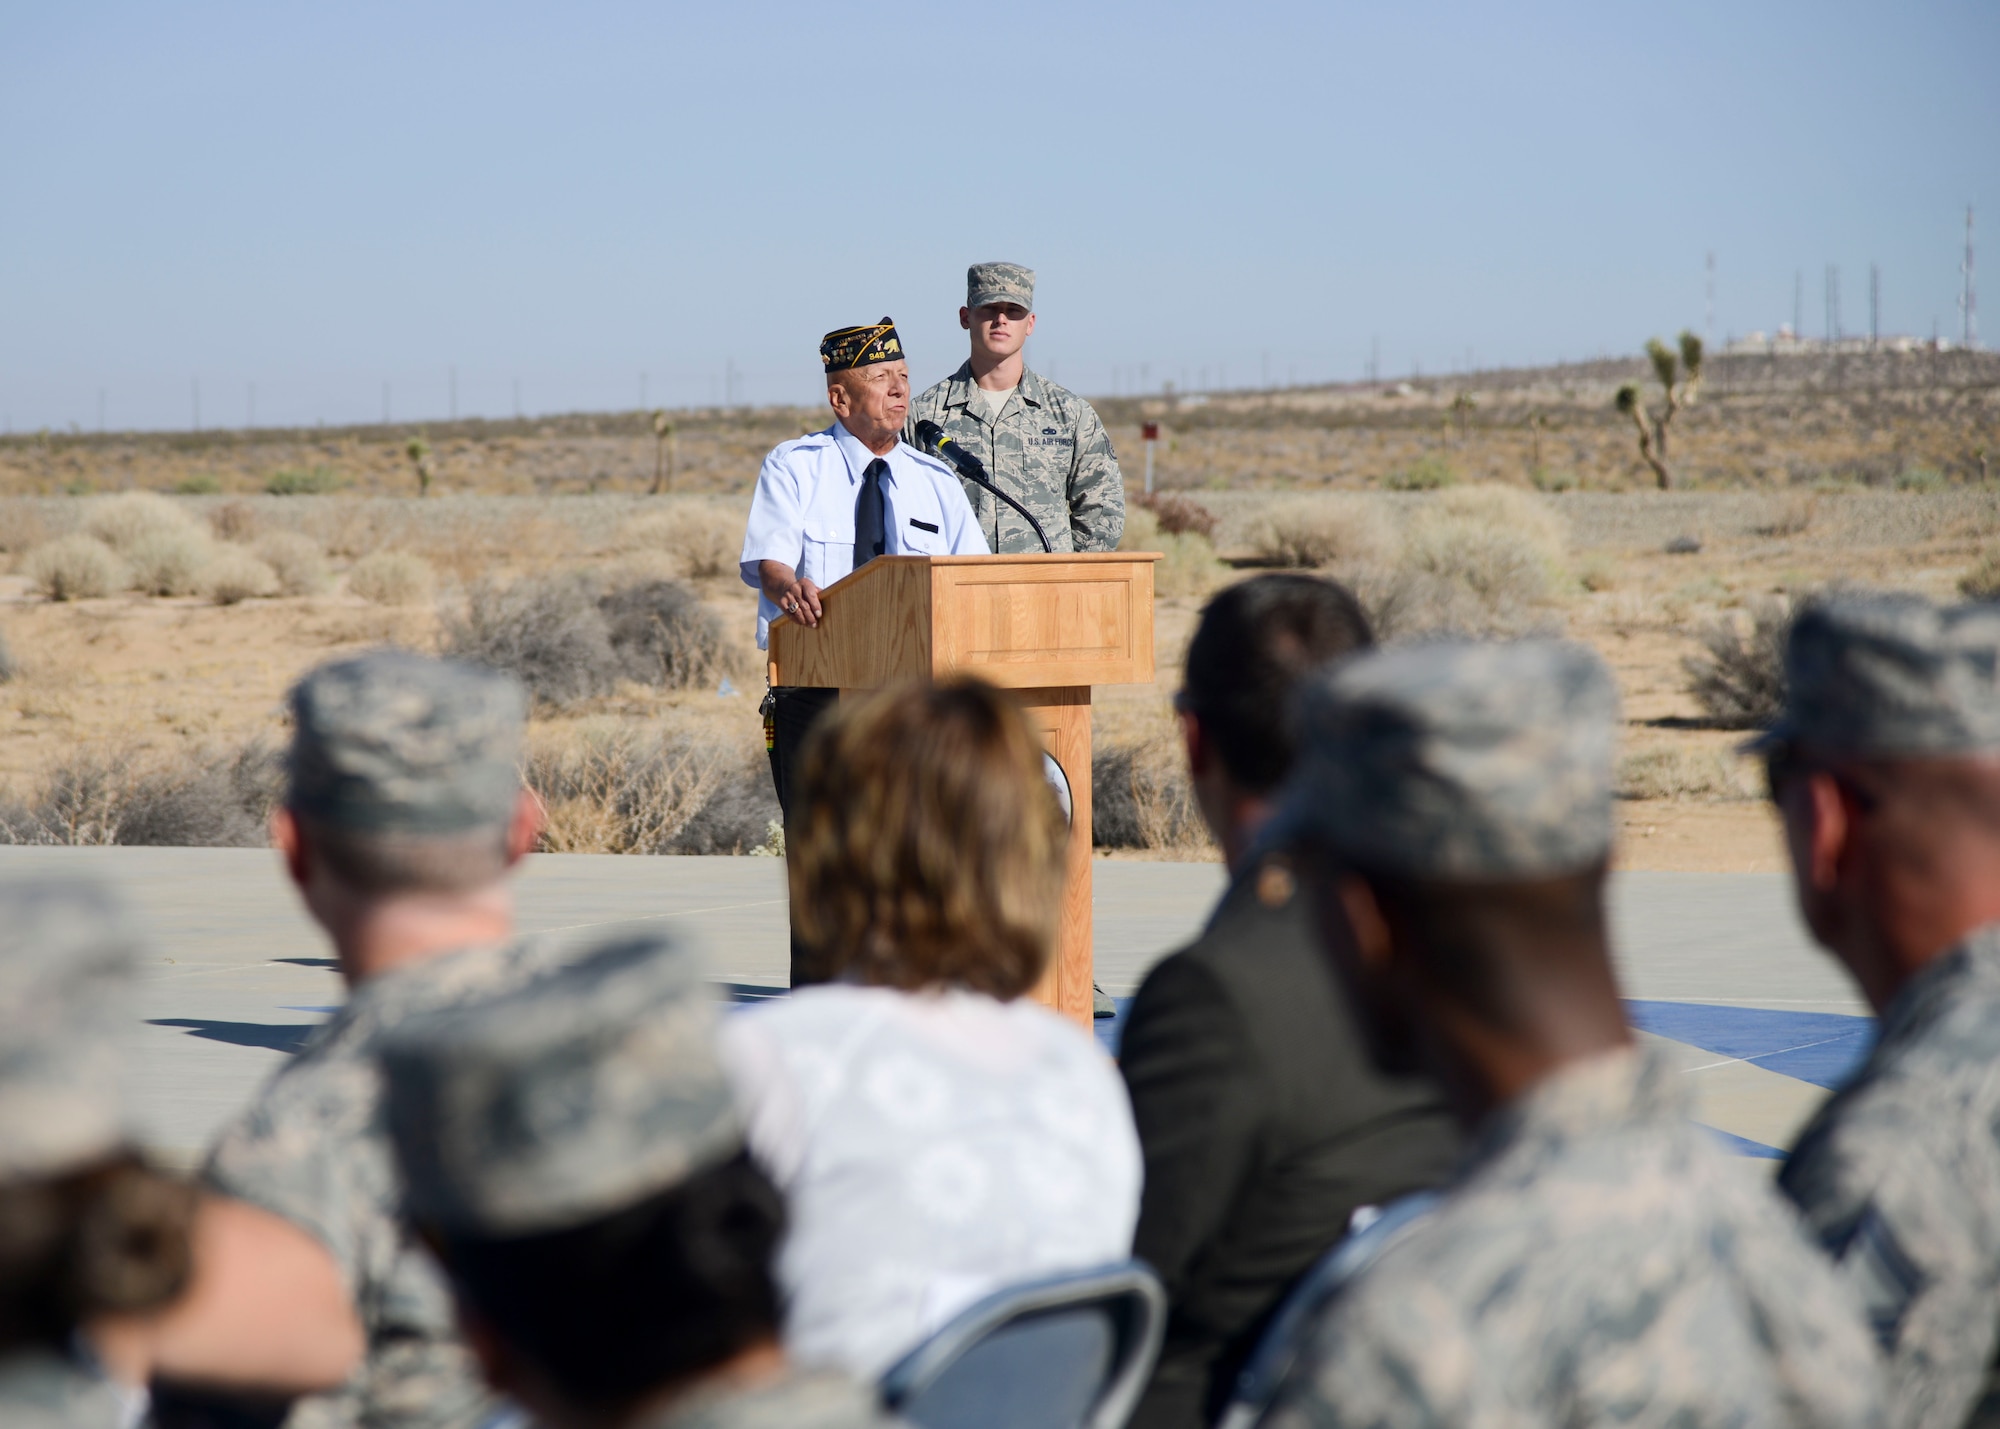 Carl Hernandez, Commander, American Legion Post 348 of Palmdale, California, gives a speech about POW/MIAs during a wreath-laying ceremony commemorating National POW/MIA Recognition Day at the Airman Leadership School Drill Pad at Edwards Air Force Base, California, Sept. 21. (U.S. Air Force photo by Giancarlo Casem)